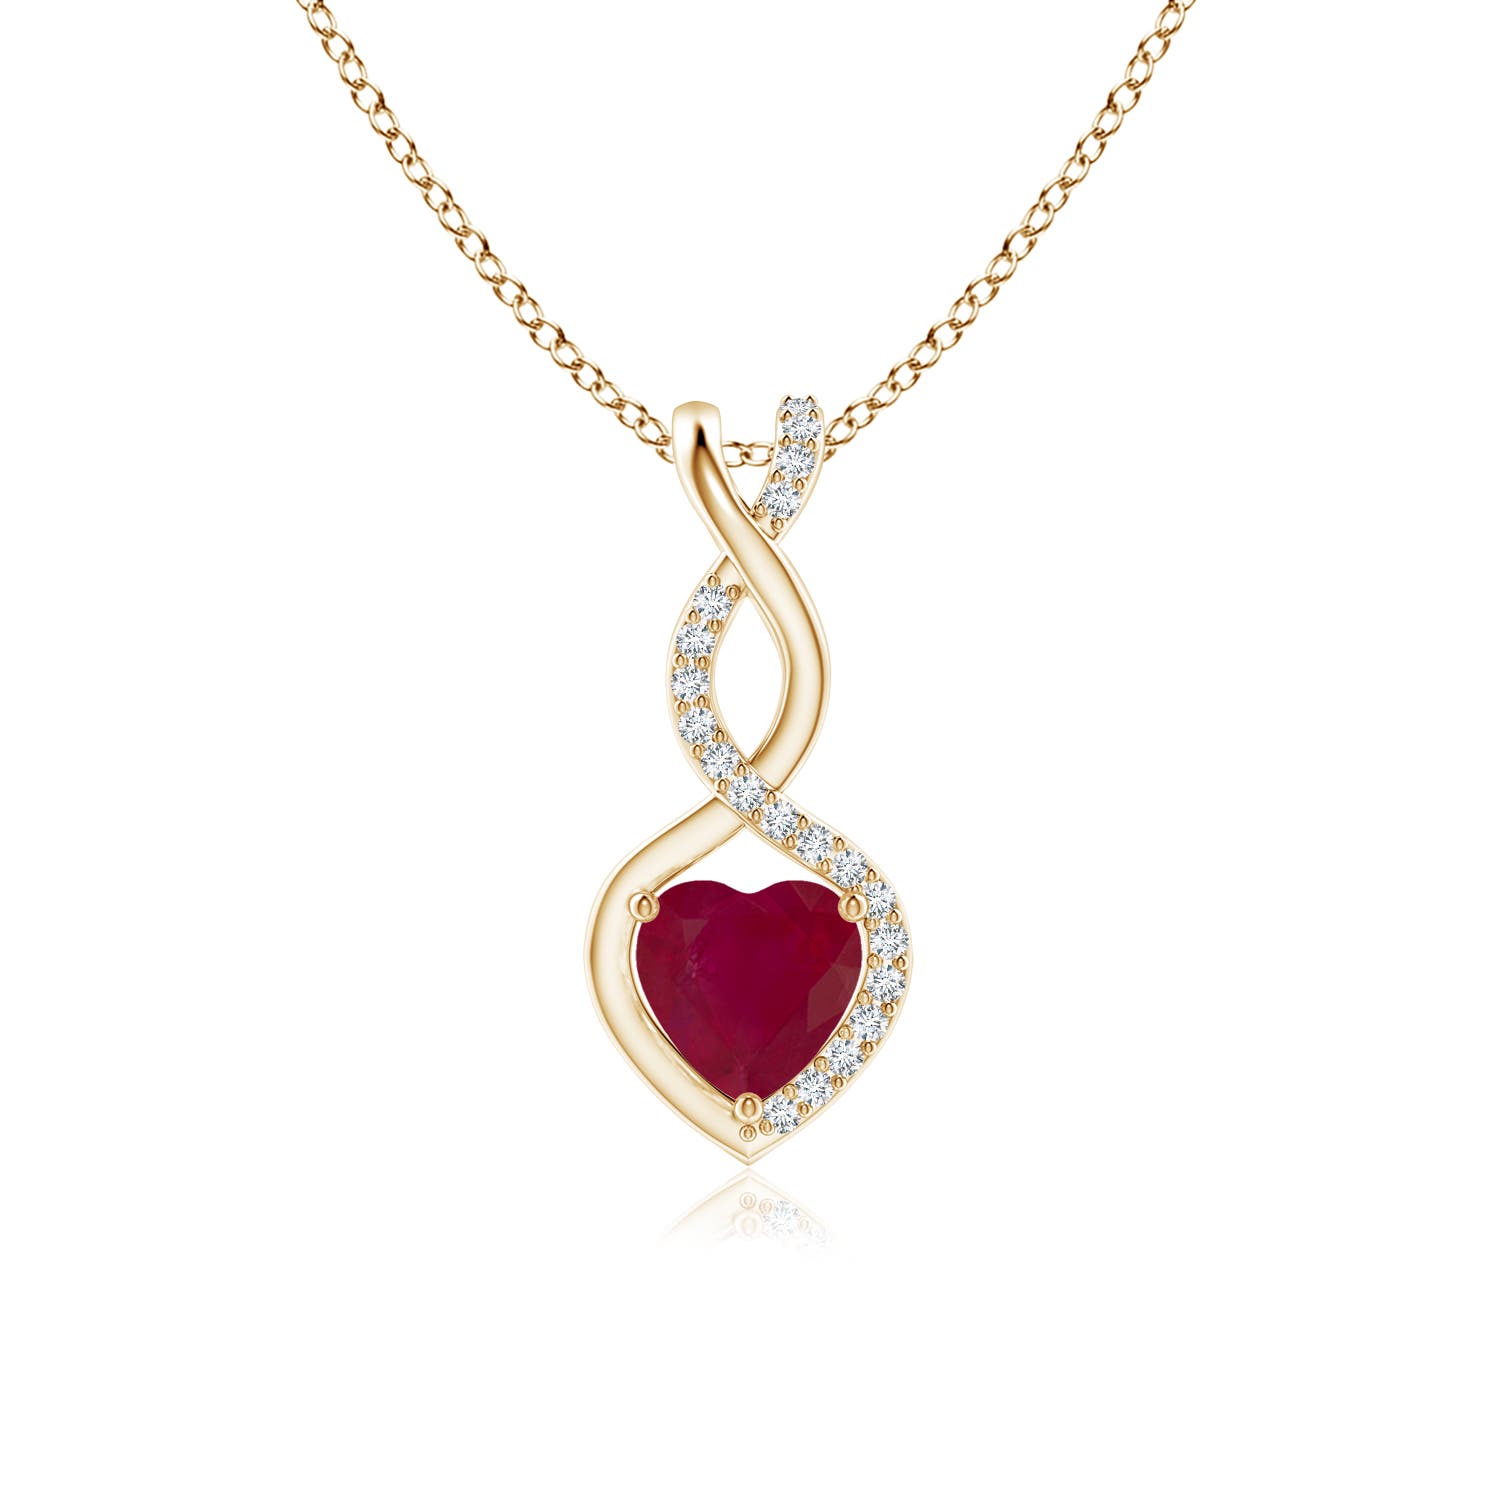 A - Ruby / 0.61 CT / 14 KT Yellow Gold